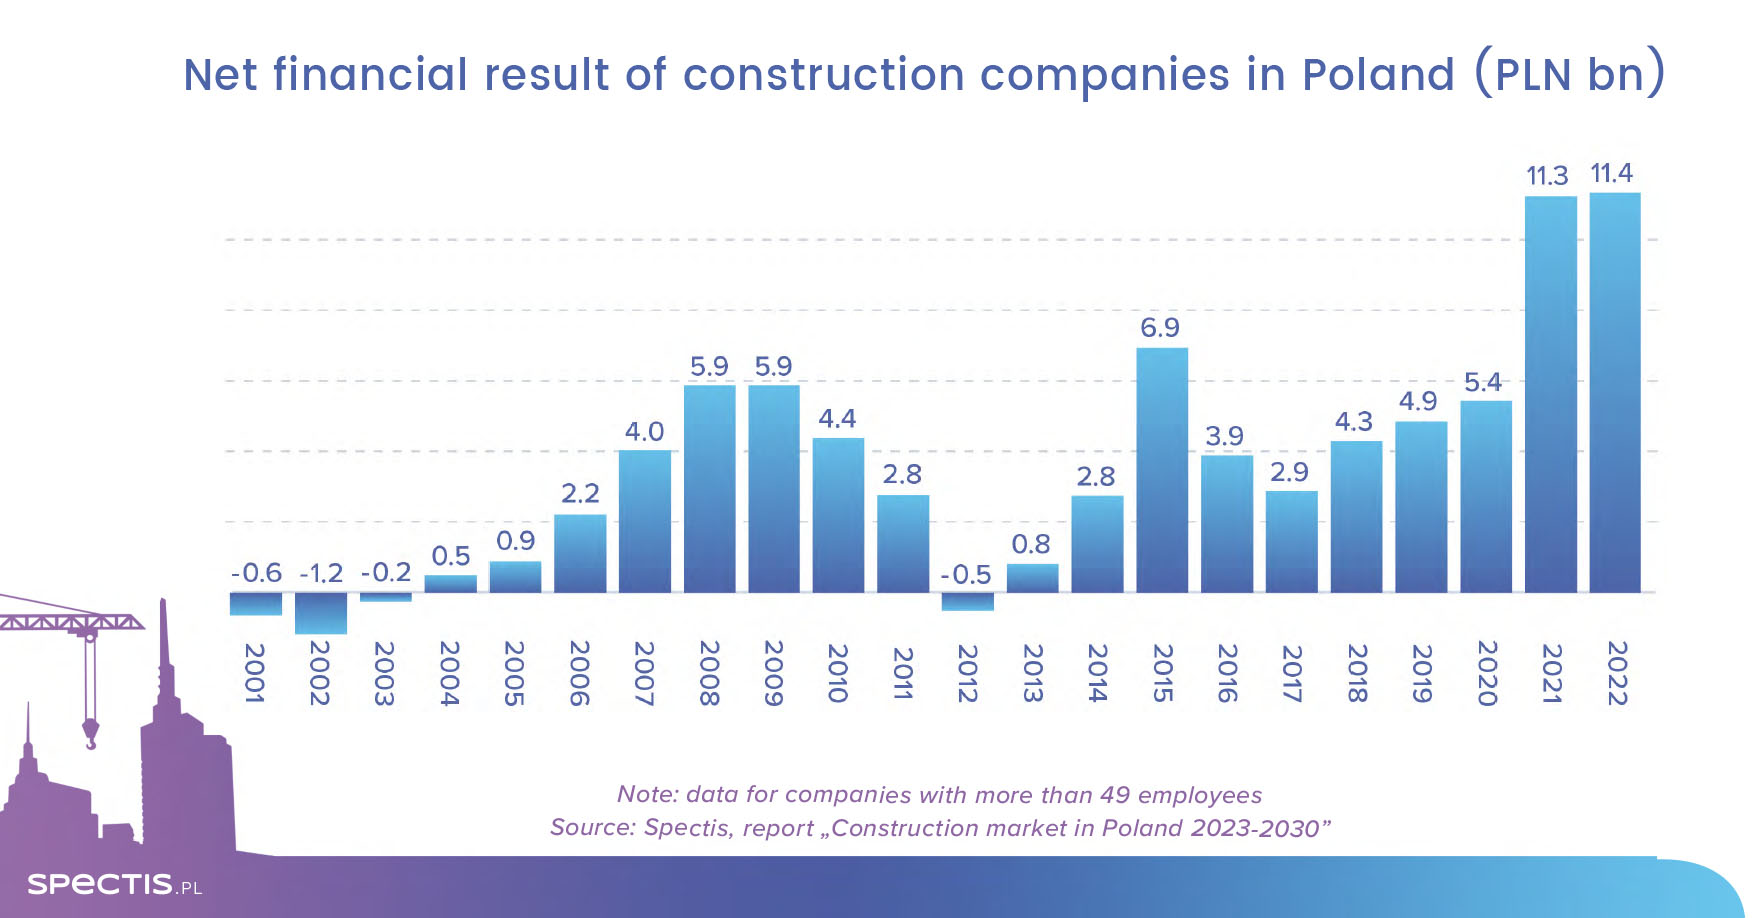 Record profitability for the Polish construction industry in 2022